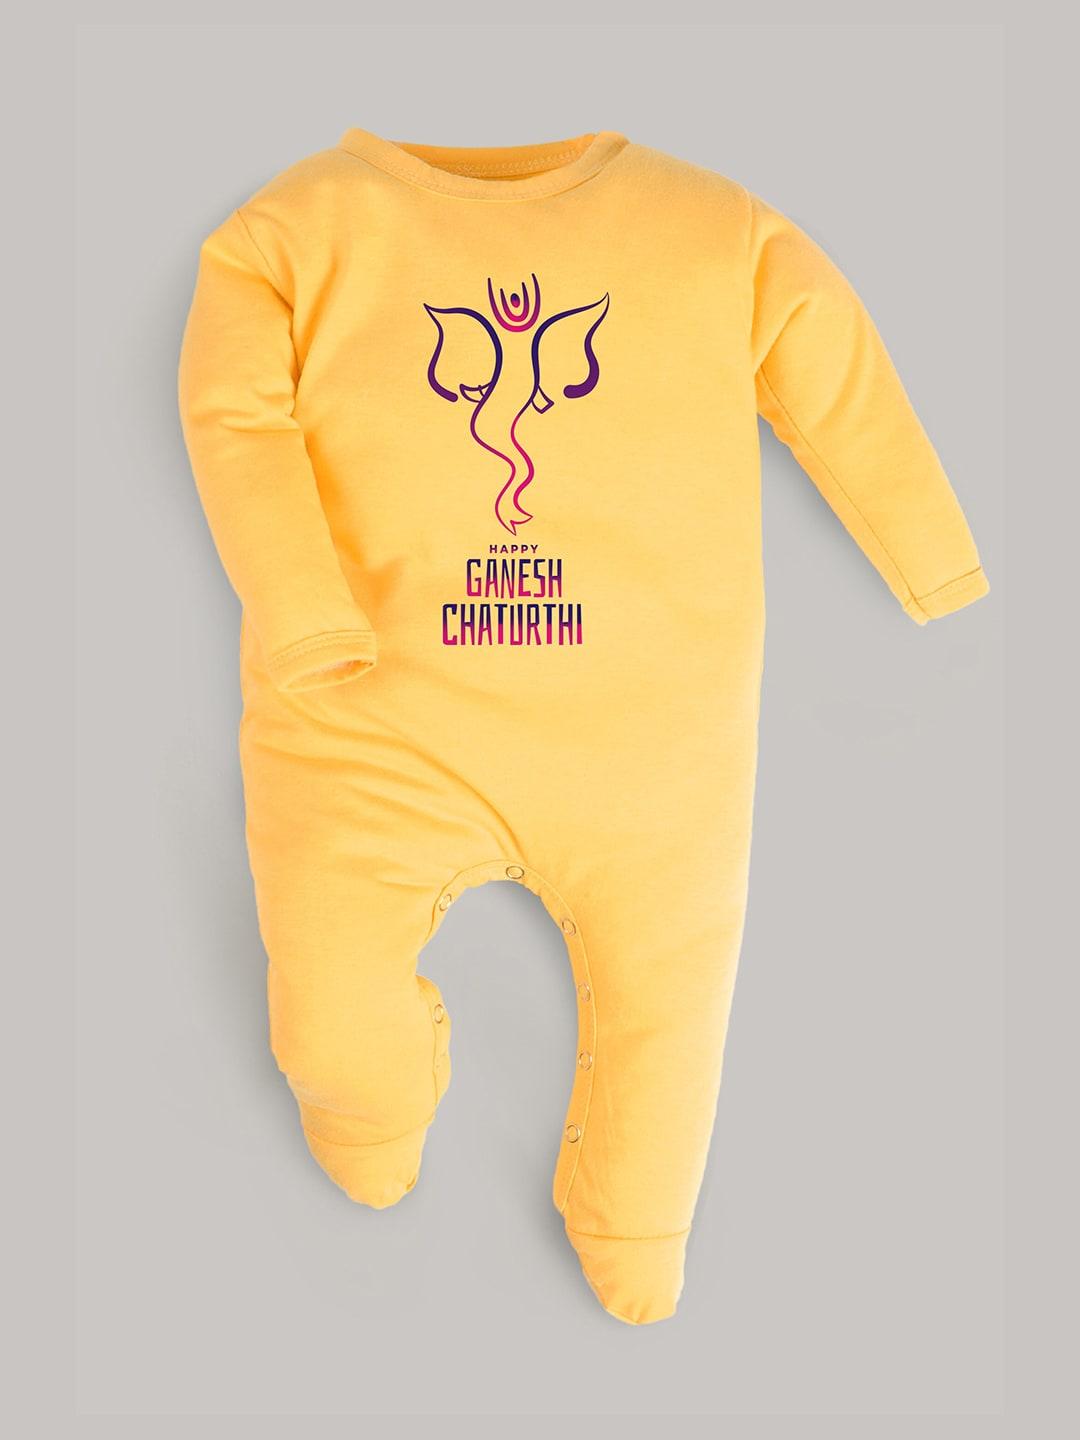 FFLIRTYGO Infants Ganesh Chaturthi Special Printed Pure Cotton Rompers